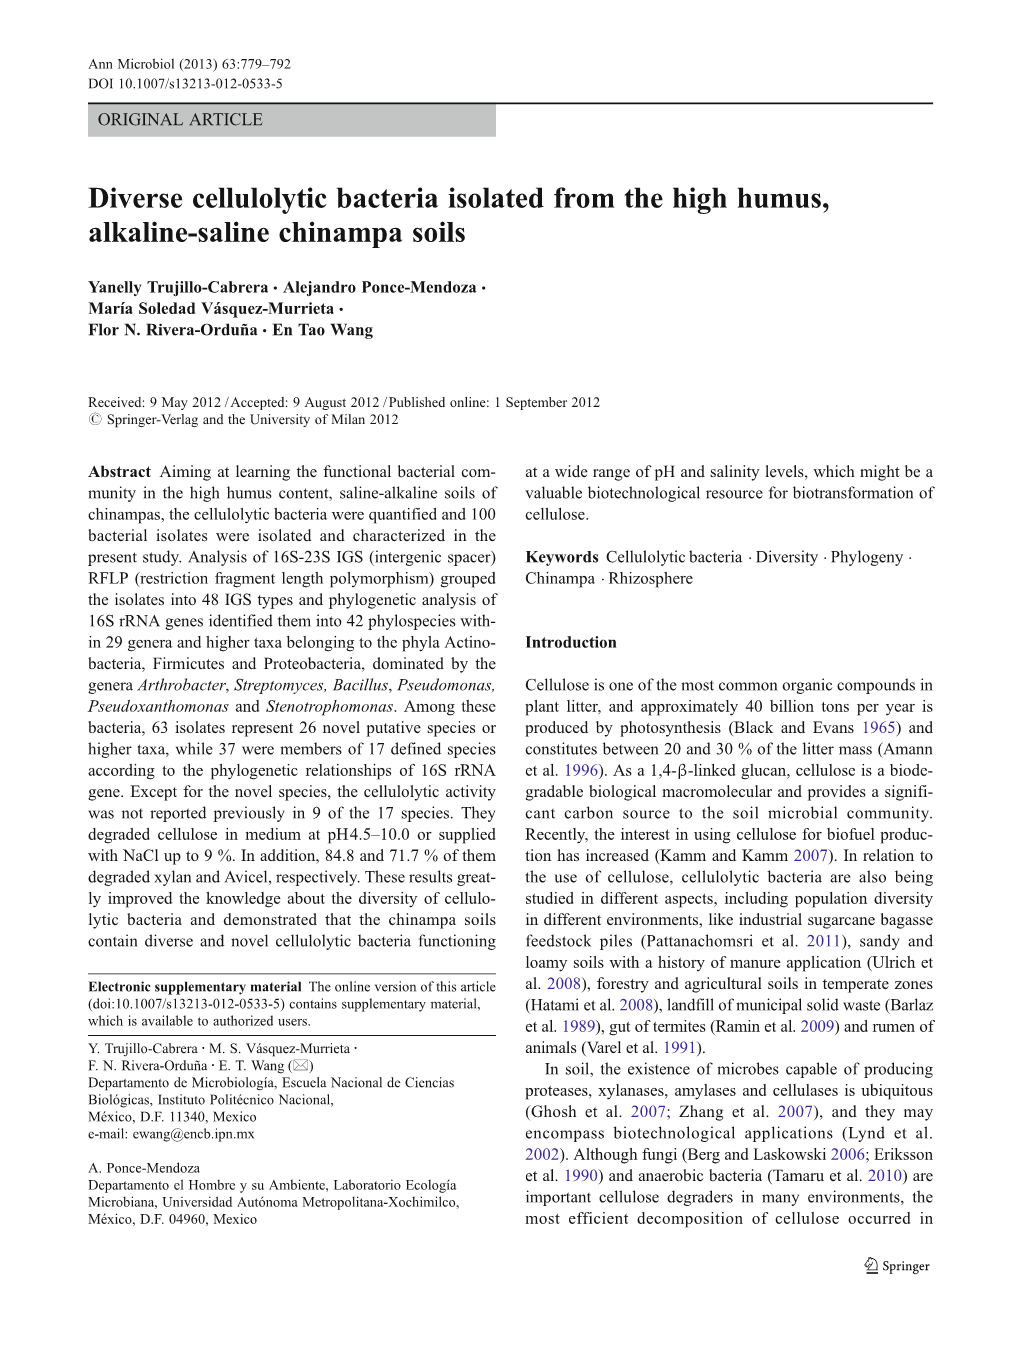 Diverse Cellulolytic Bacteria Isolated from the High Humus, Alkaline-Saline Chinampa Soils